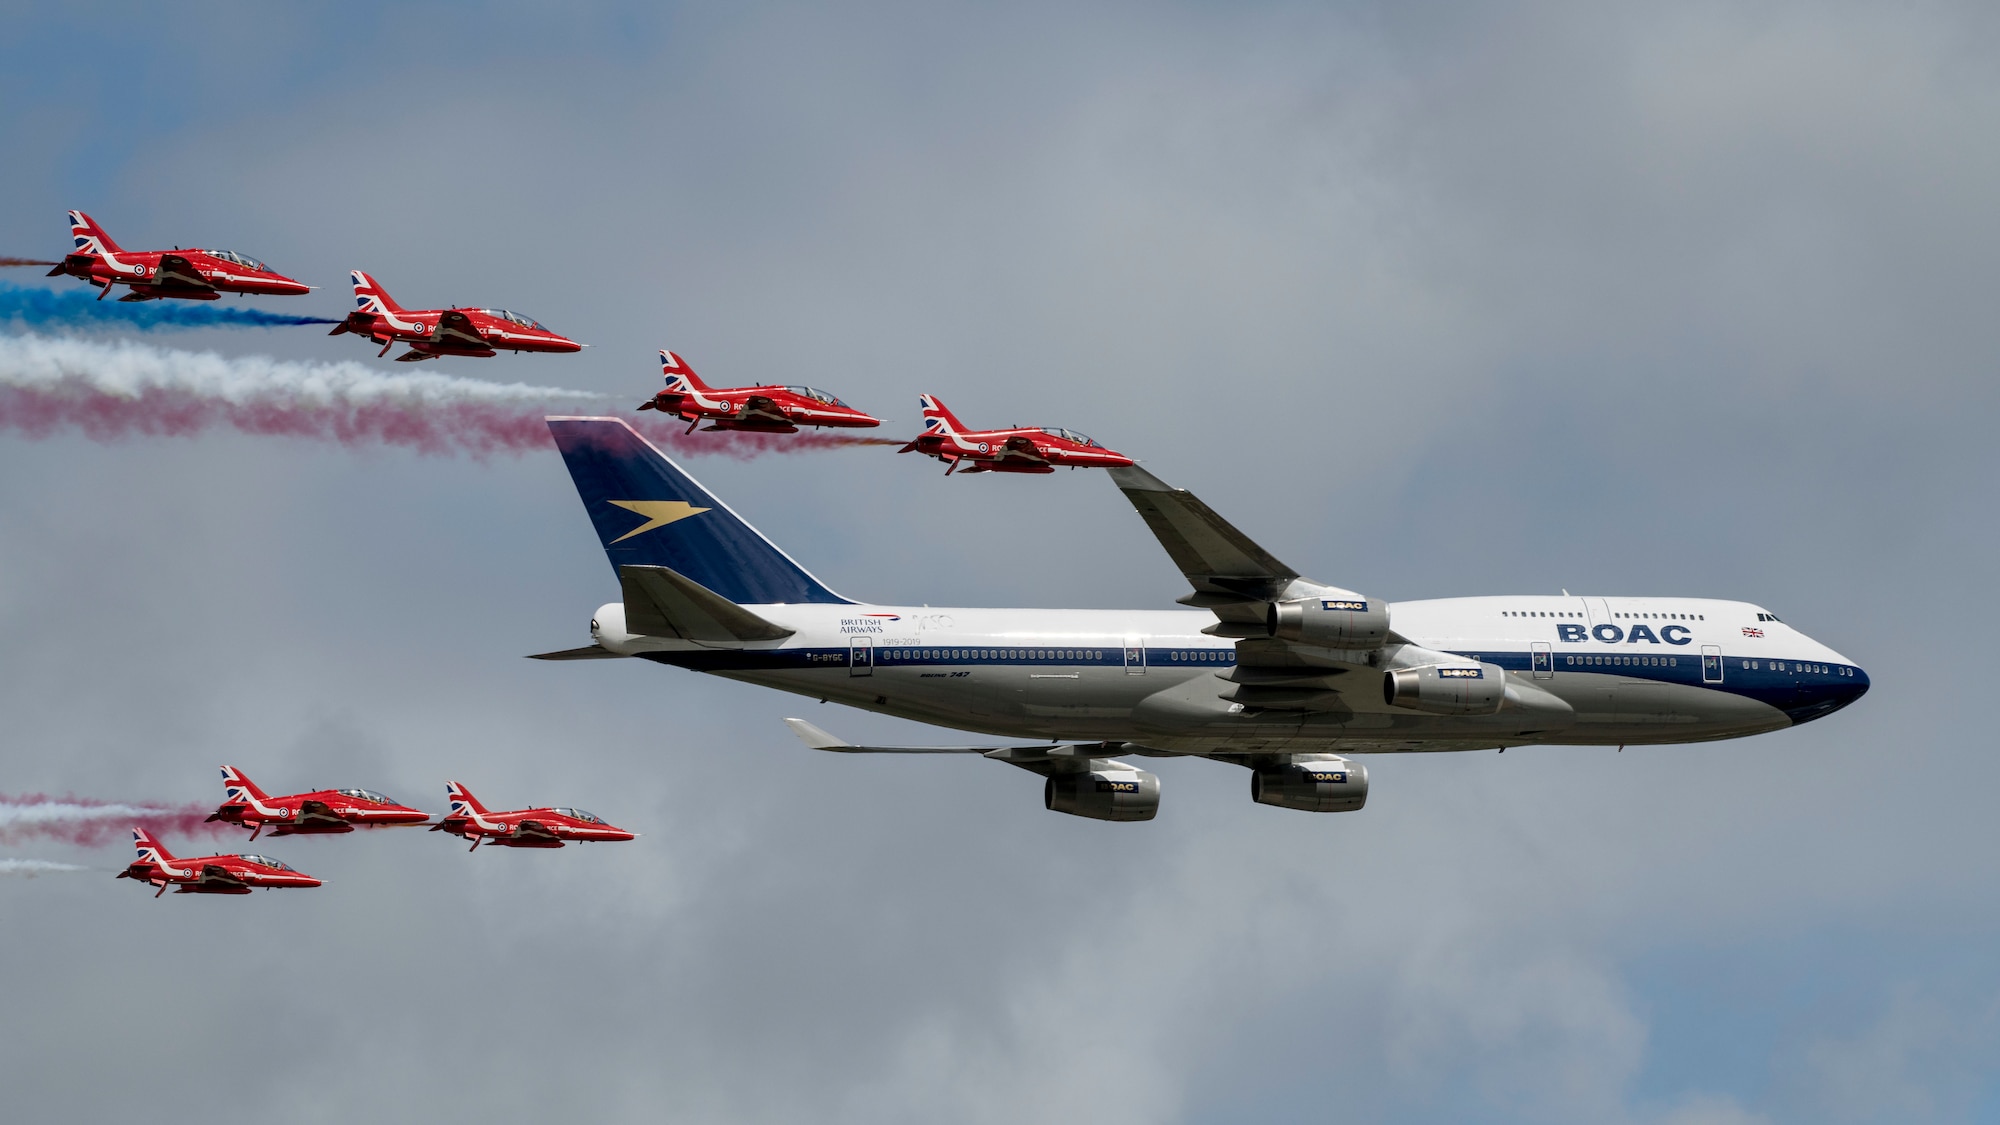 The Royal Air Force’s Red Arrows and a British Airways Boeing 747-436 conduct a flypast during the 2019 Royal International Air Tattoo at RAF Fairford, England, July 20, 2019. This year, RIAT commemorated the 70th anniversary of NATO and highlighted the United States' enduring commitment to its European allies. (U.S. Air Force photo by Airman 1st Class Jennifer Zima)